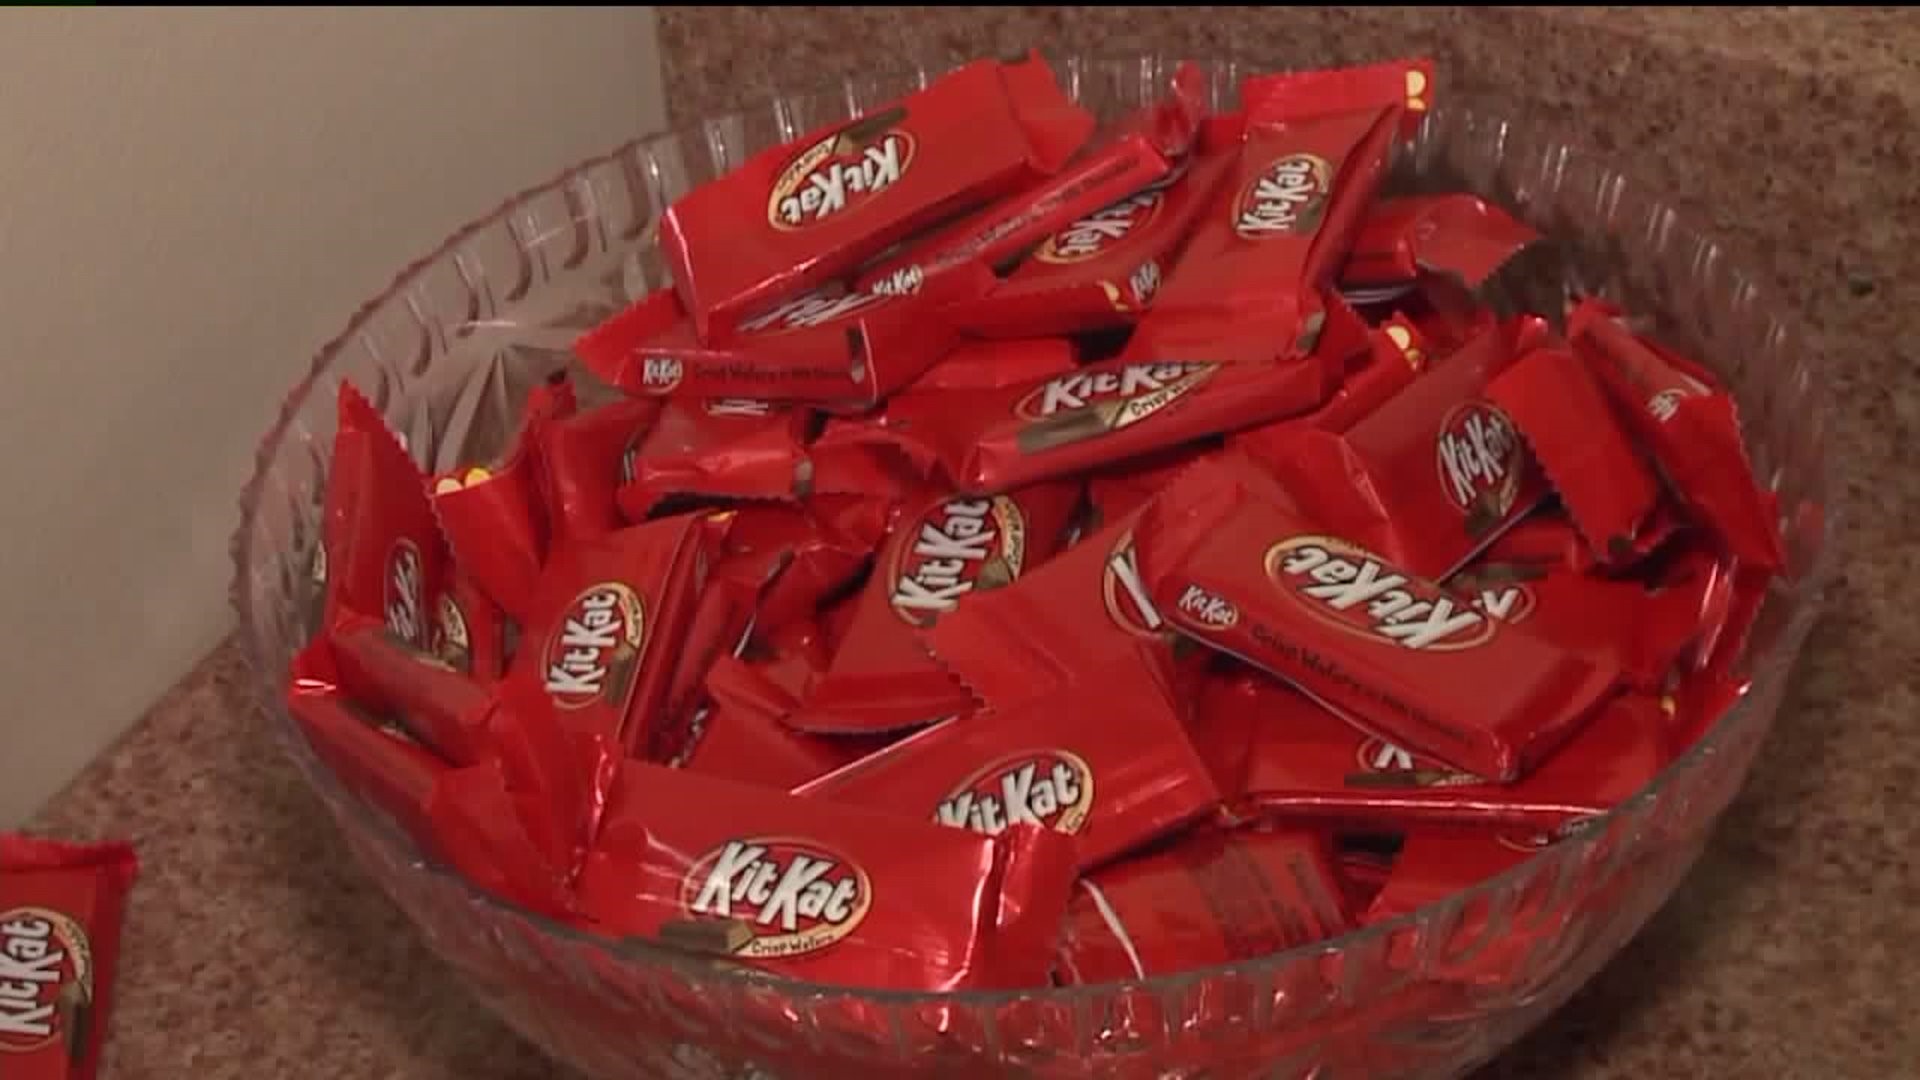 Kit-Kat Production Expanding in Luzerne County